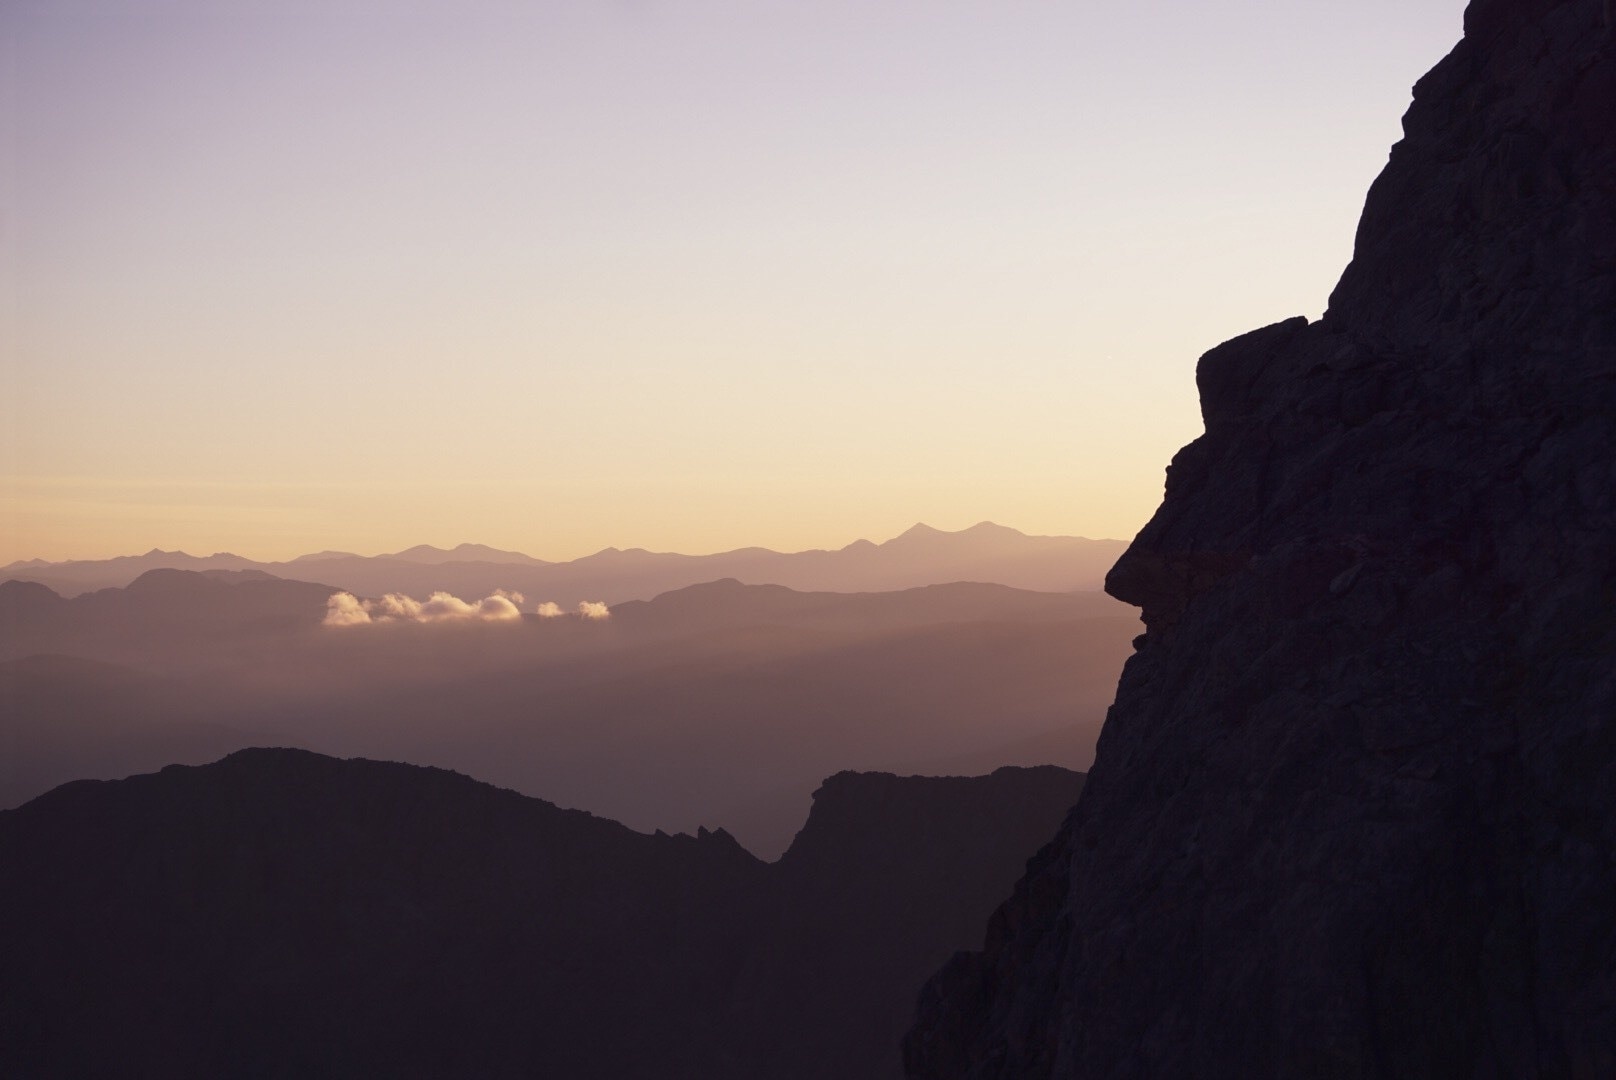 One of the mountains faces brought to life by the first rays of sunrise. 

#adventure